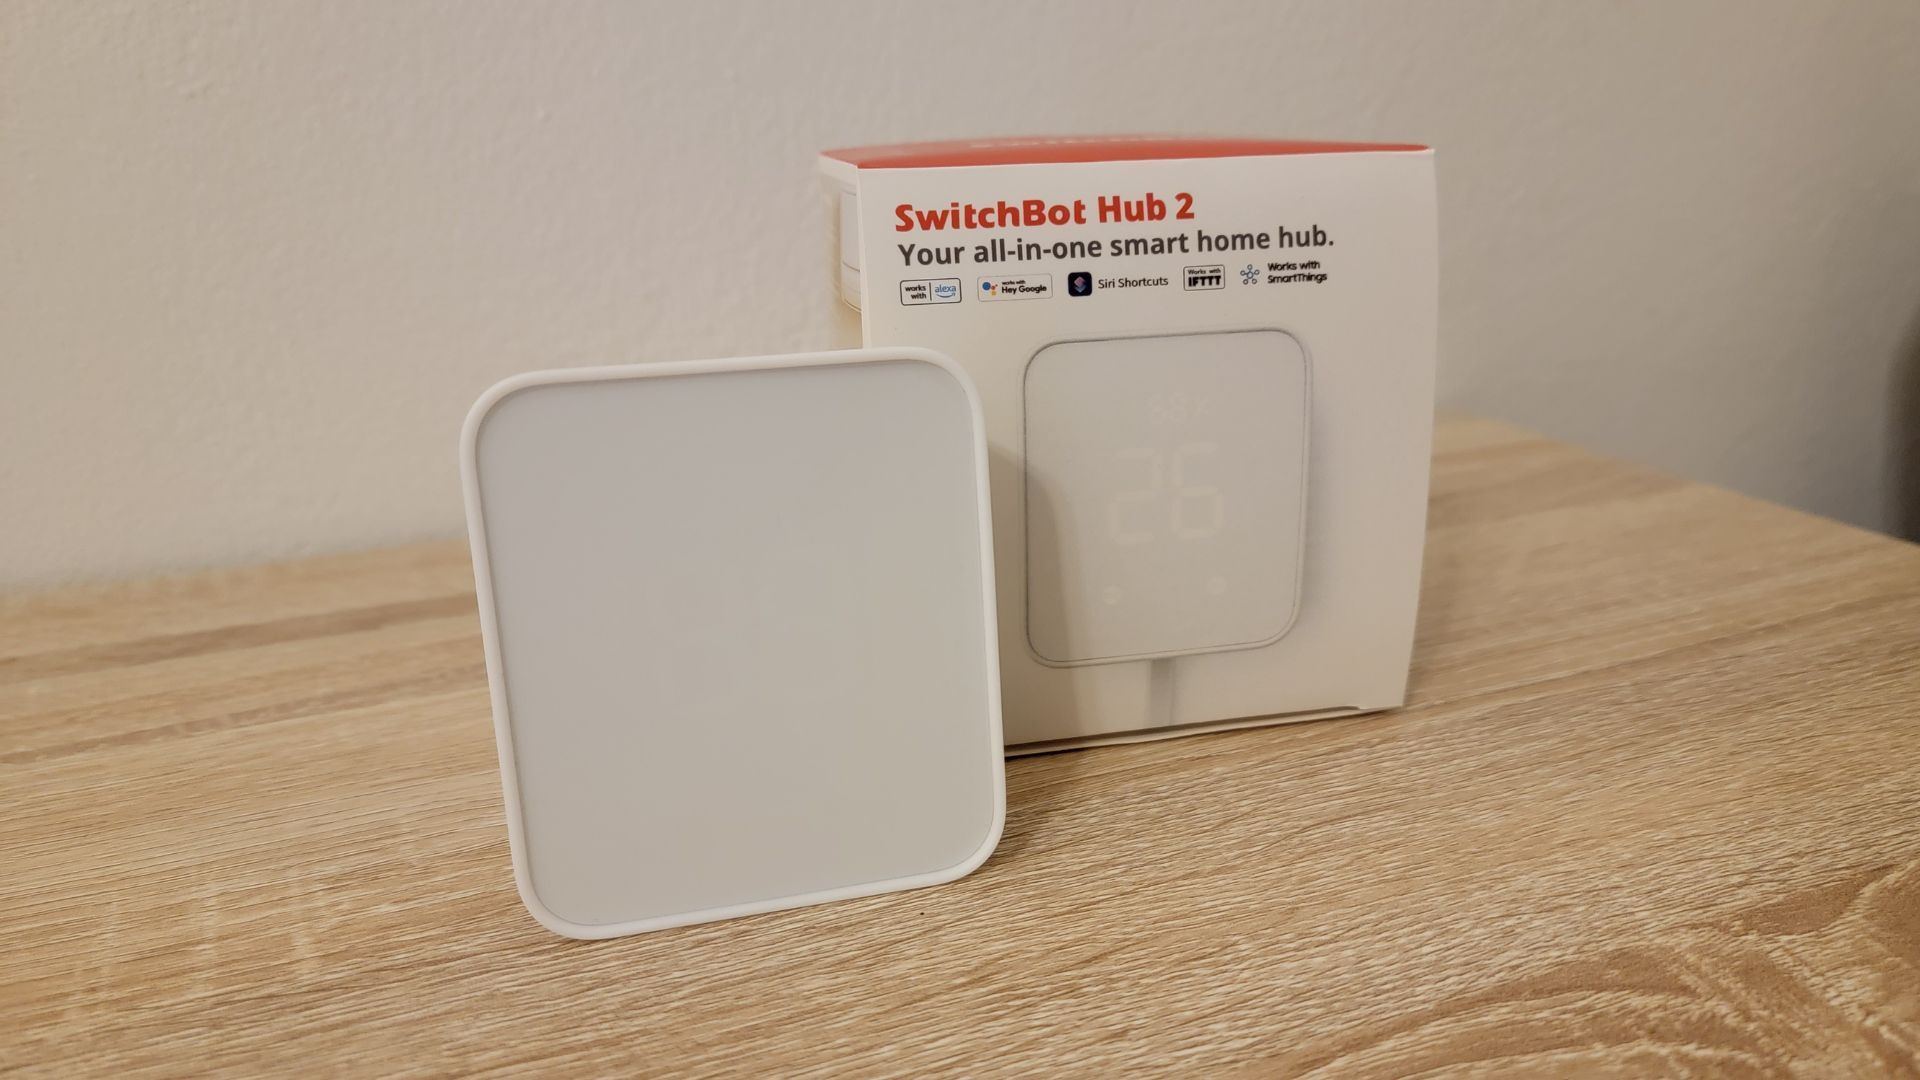 Switchbot Hub 2 Review: an Upgrade That Matters